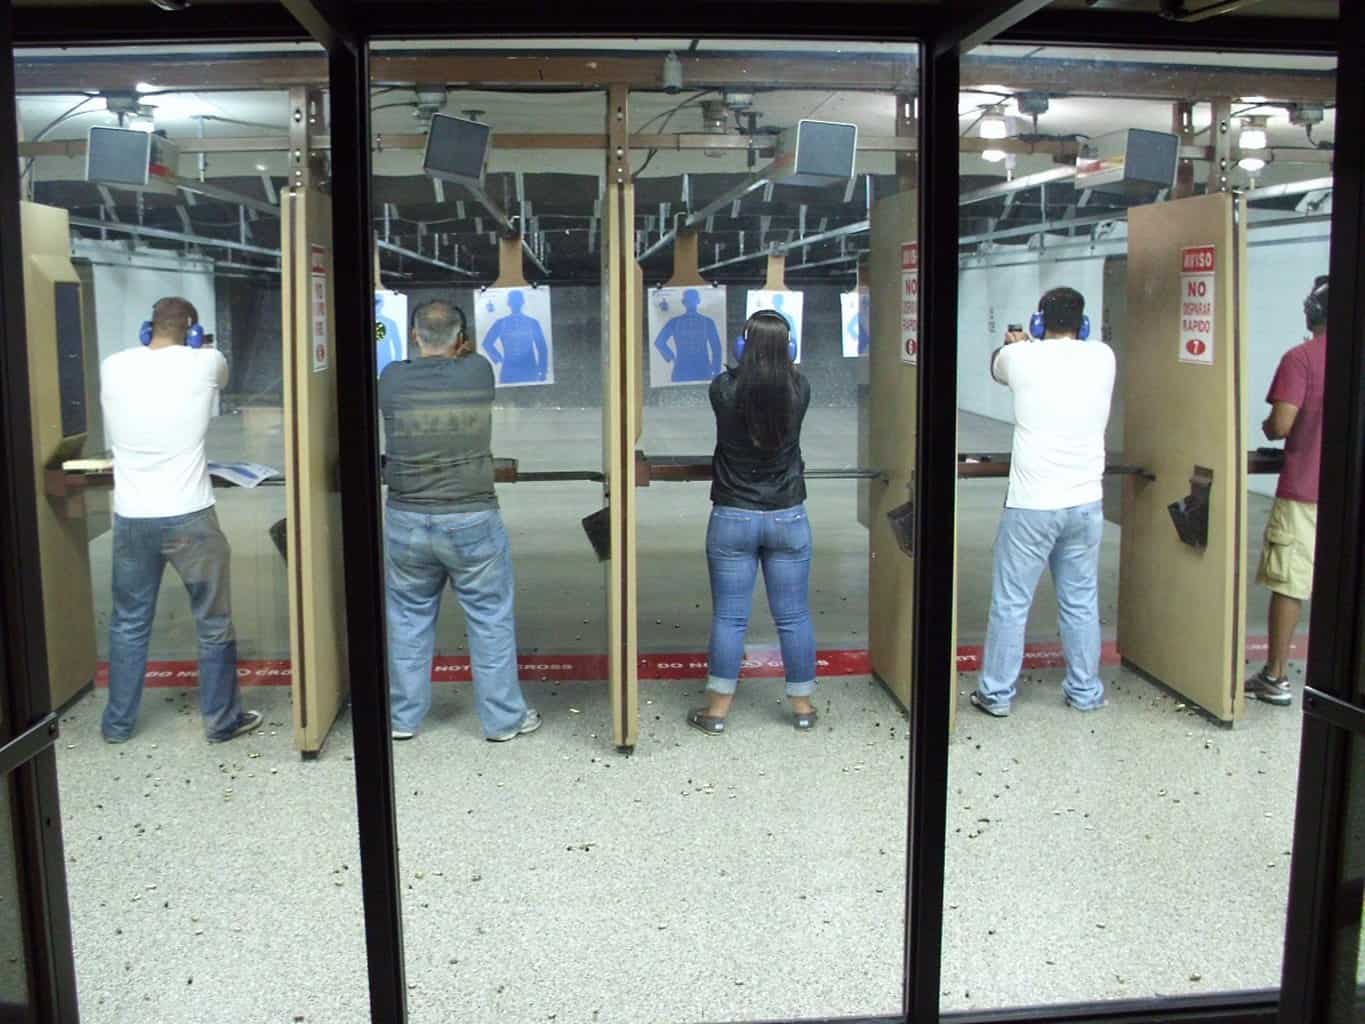 People preparing to do practice shooting at a top shooting range in Connecticut